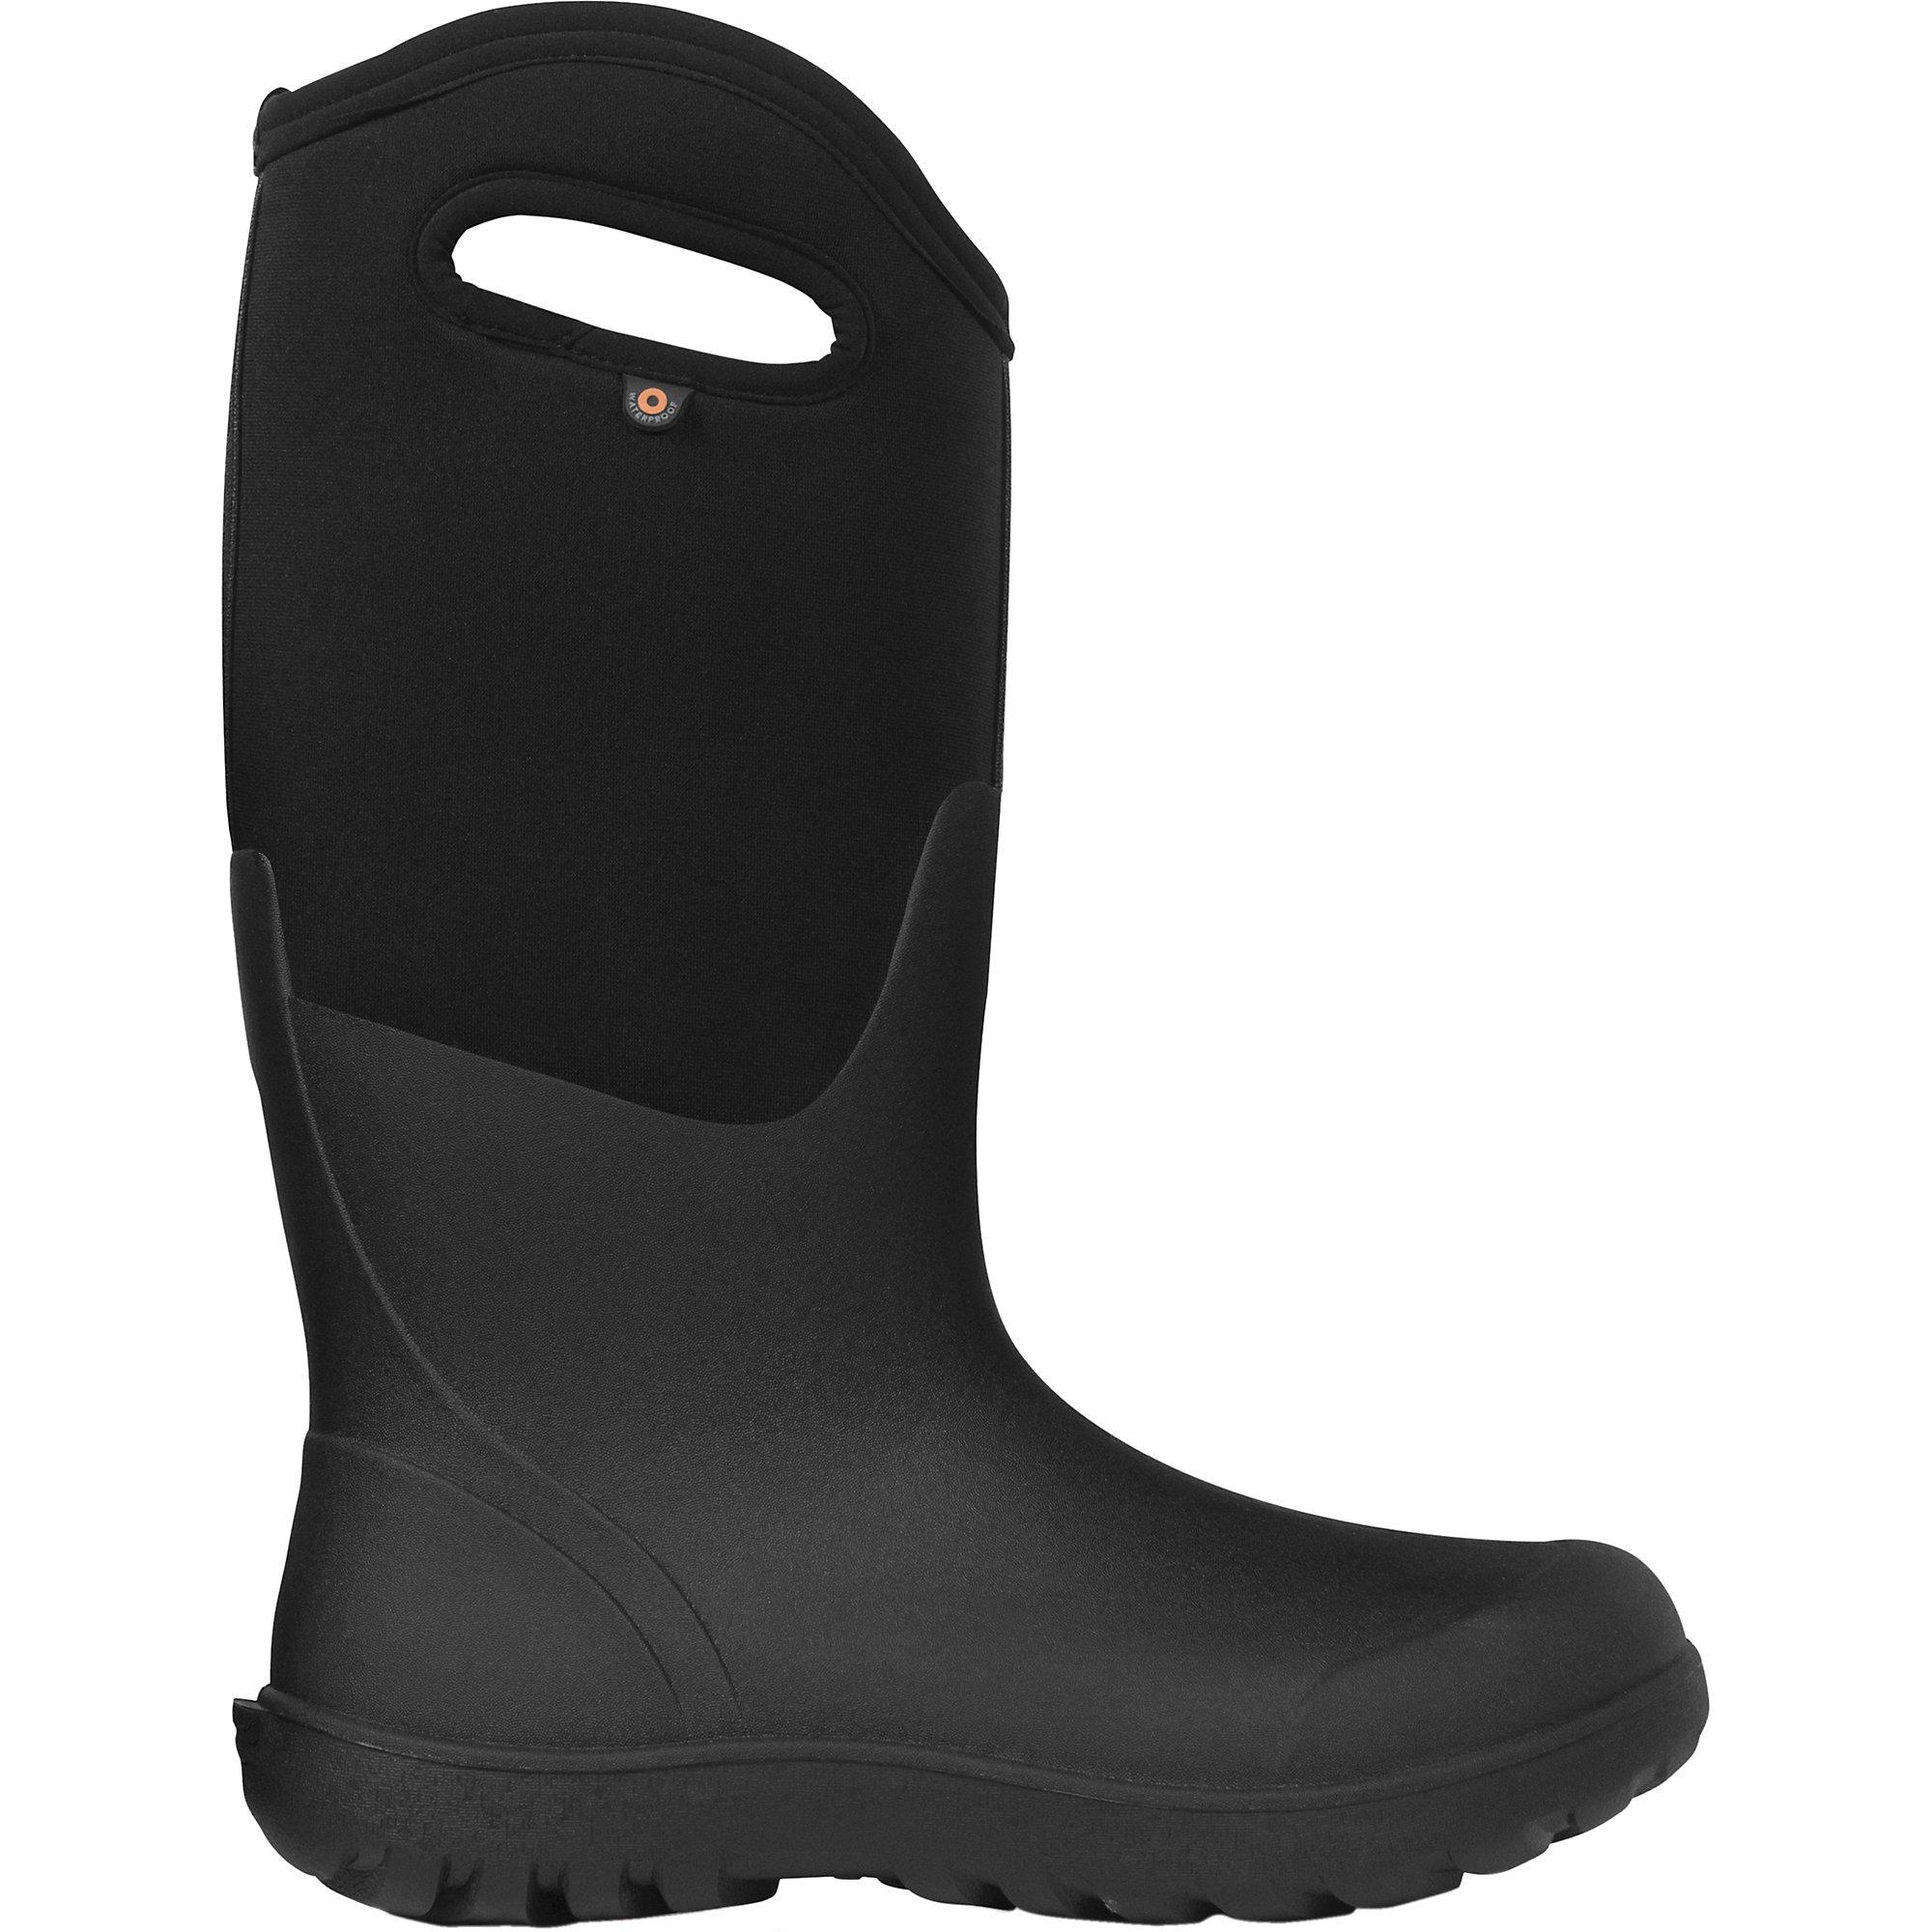 Bogs Neo-classic Tall Waterproof Winter Boots in Black - Save 25% - Lyst